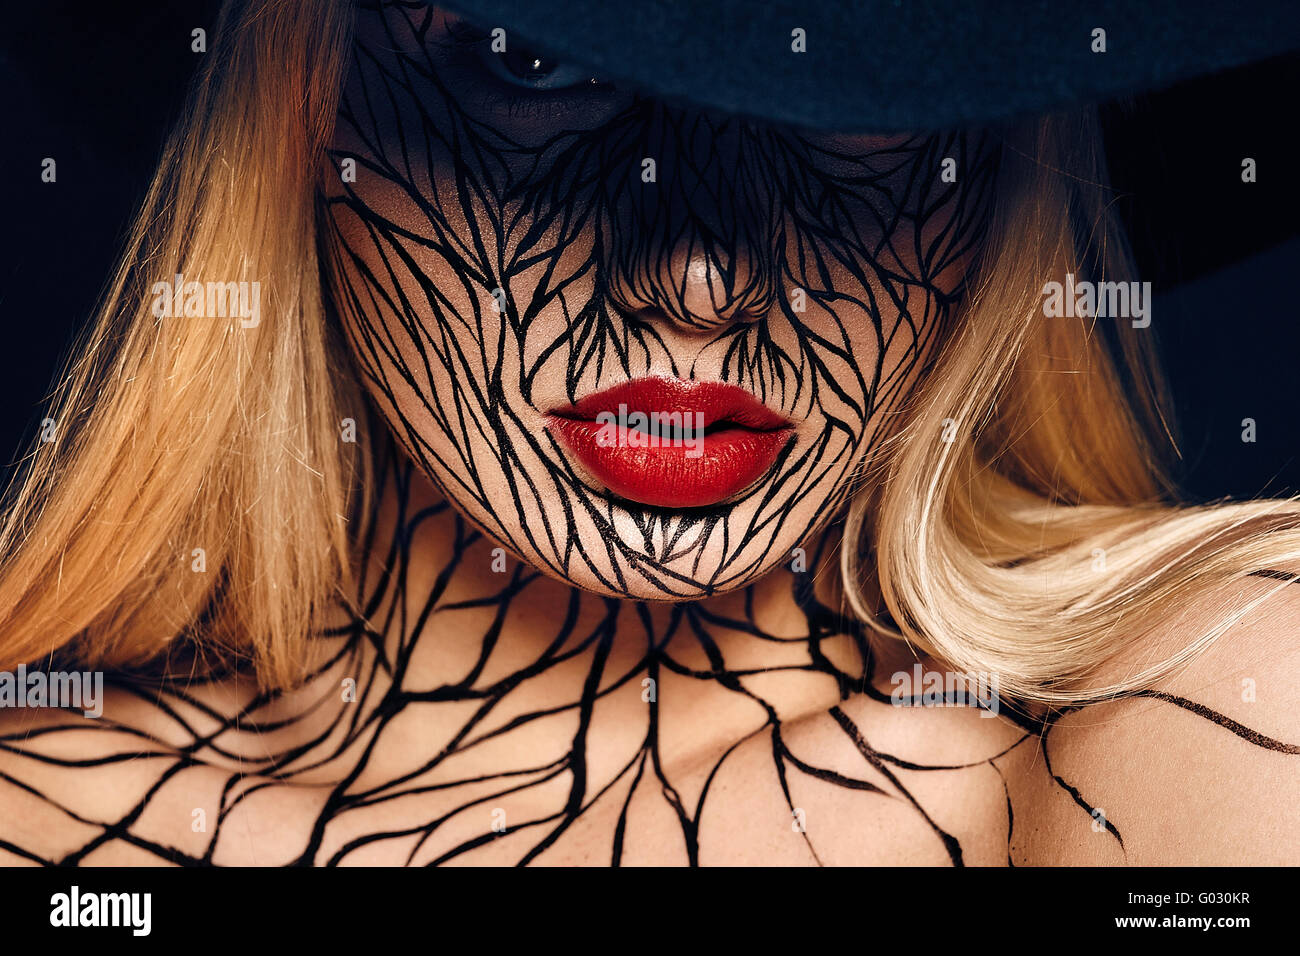 fashion portrait of girl with faceart and red lips. Picture taken in the studio on a black background. Stock Photo